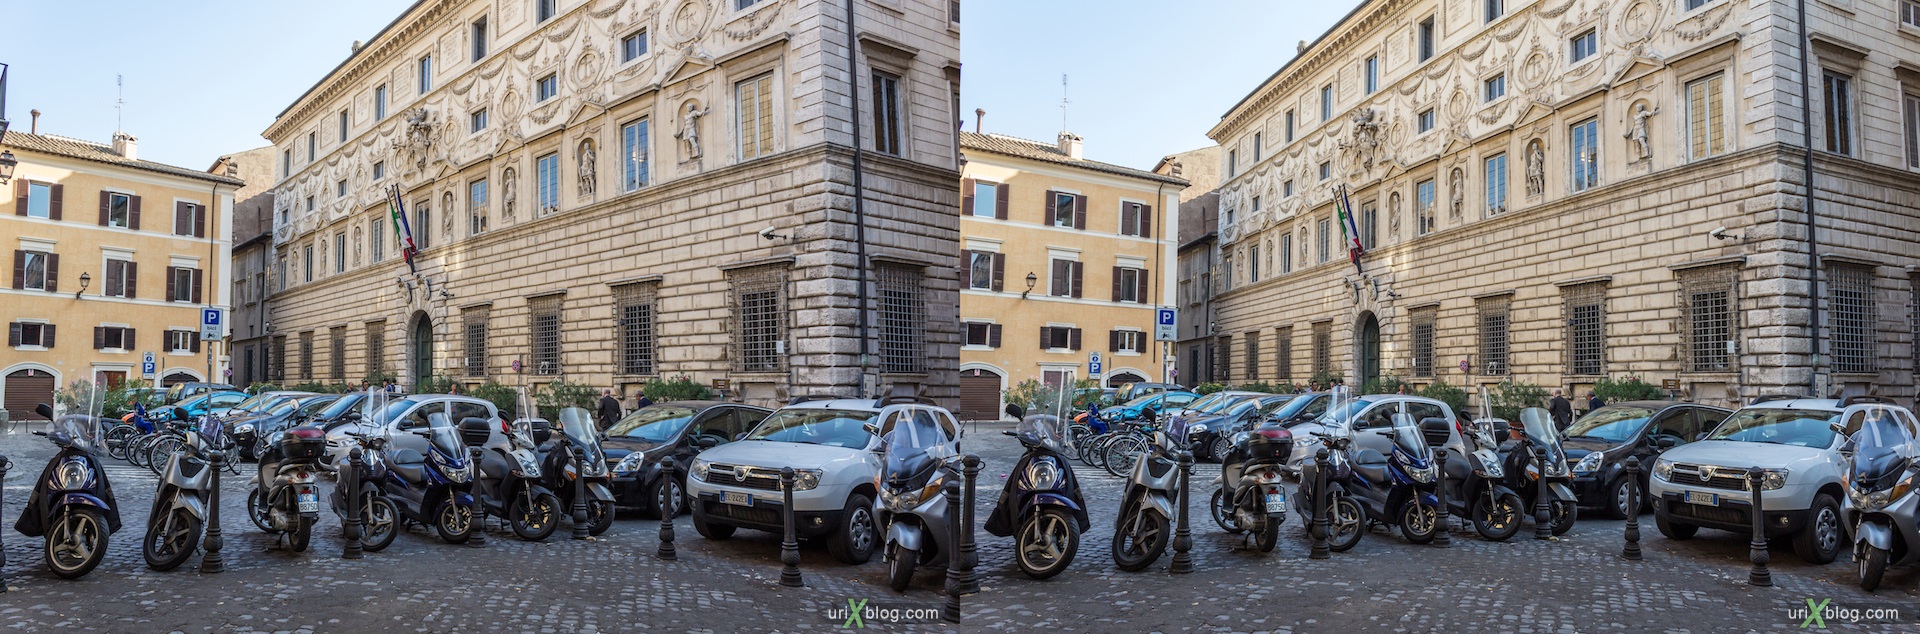 2012, piazza della Quercia square, 3D, stereo pair, cross-eyed, crossview, cross view stereo pair